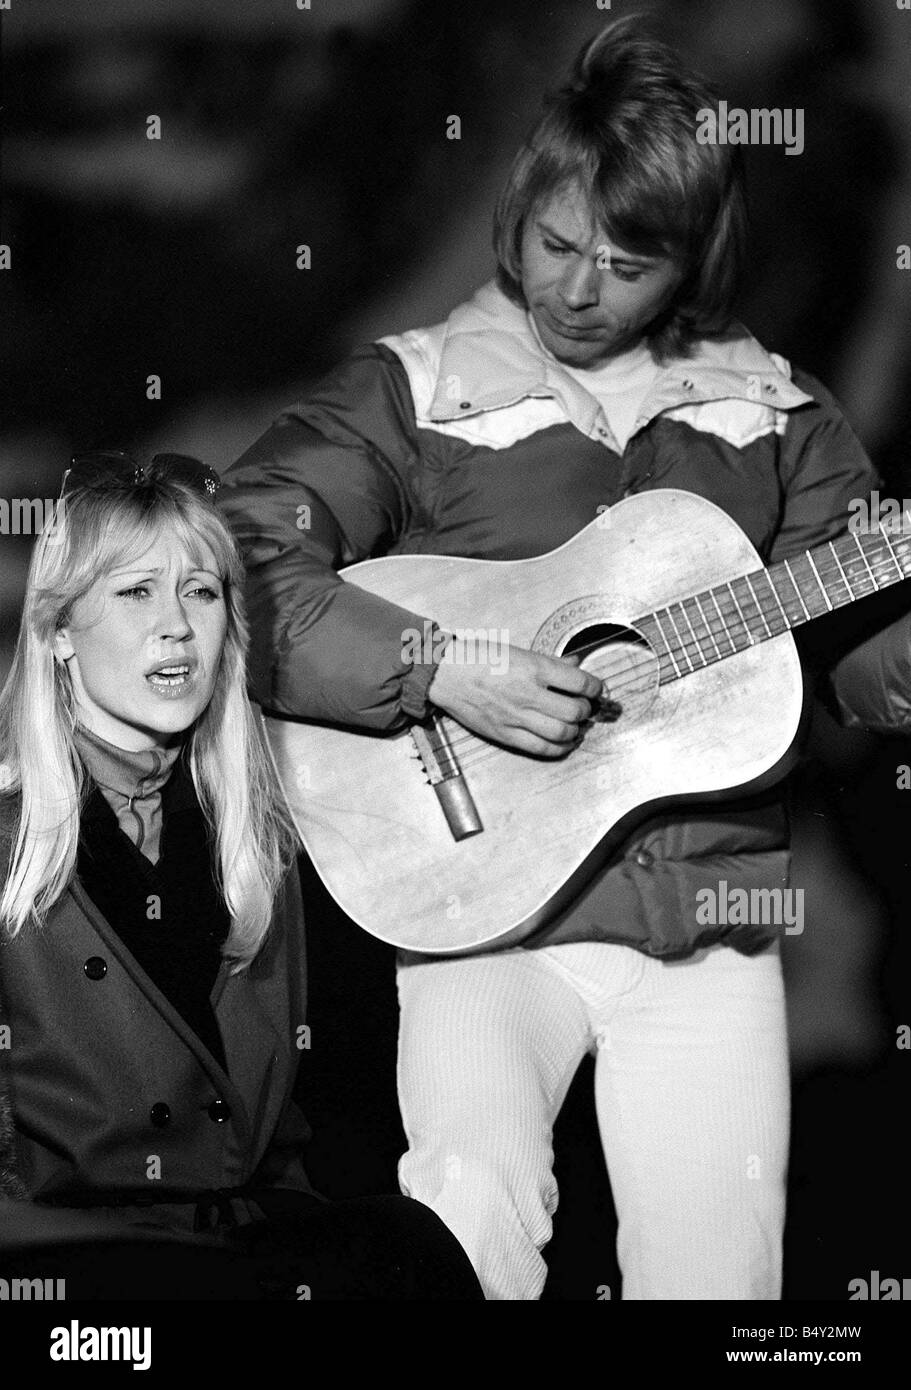 ABBA February 1979 Abba the 1970s Swedish pop group consisting of Benny Frida Bjorn and Anna who won in the 1974 Eurovision song contest with the song Waterloo OPS Bjorn and Anna in Switzerland recording a video 24 2 1979 Stock Photo